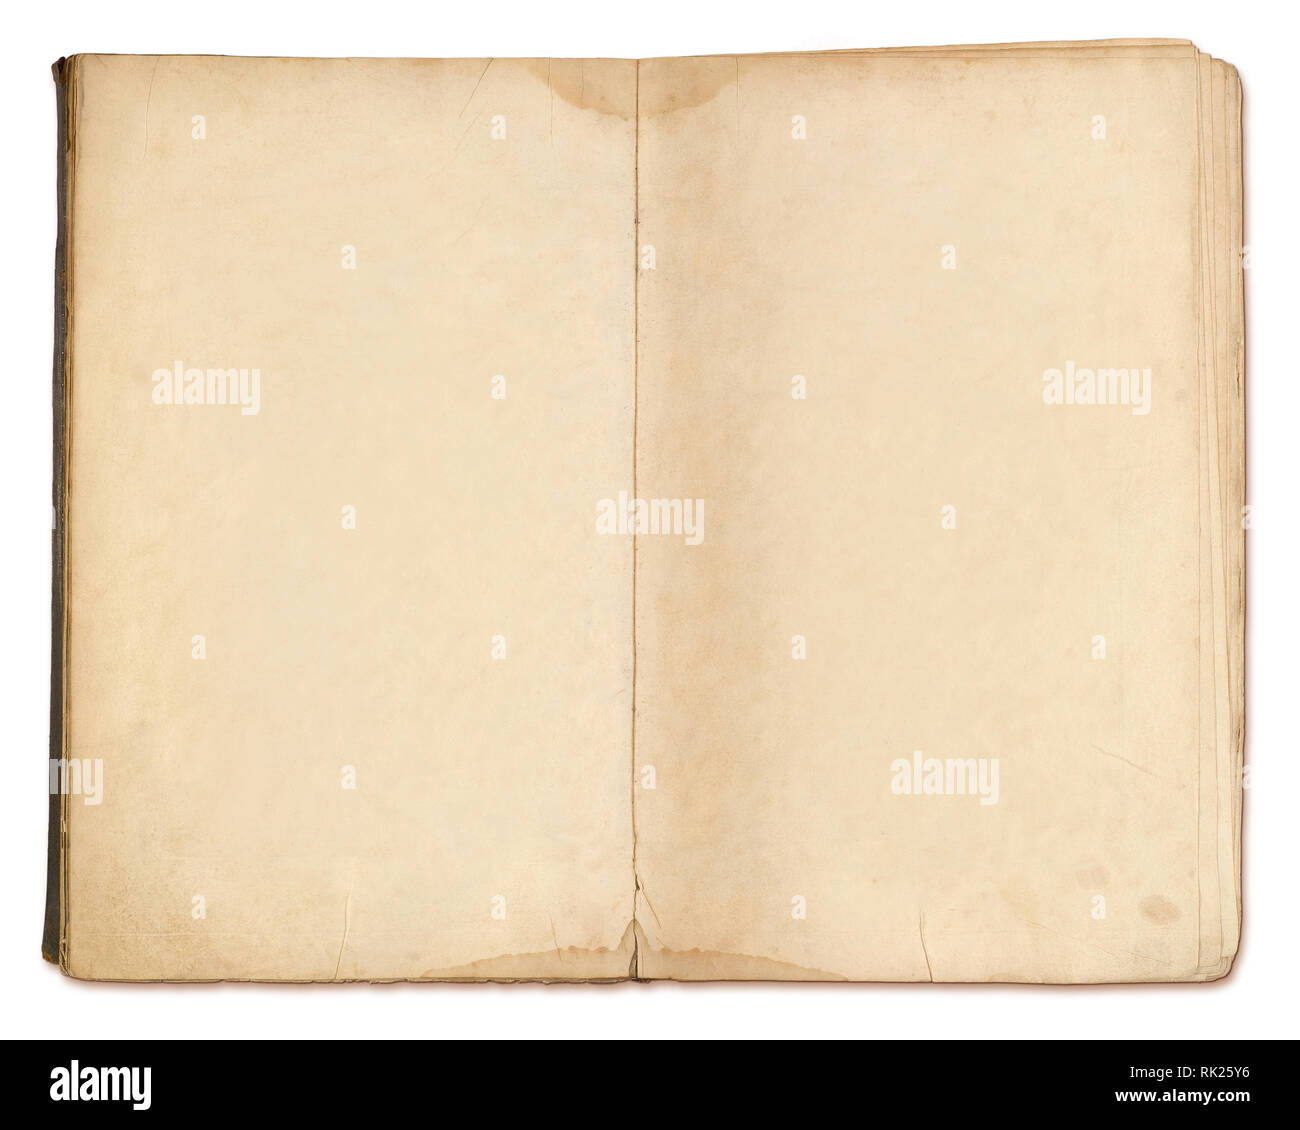 Blank pages in old notebook isolated Stock Photo